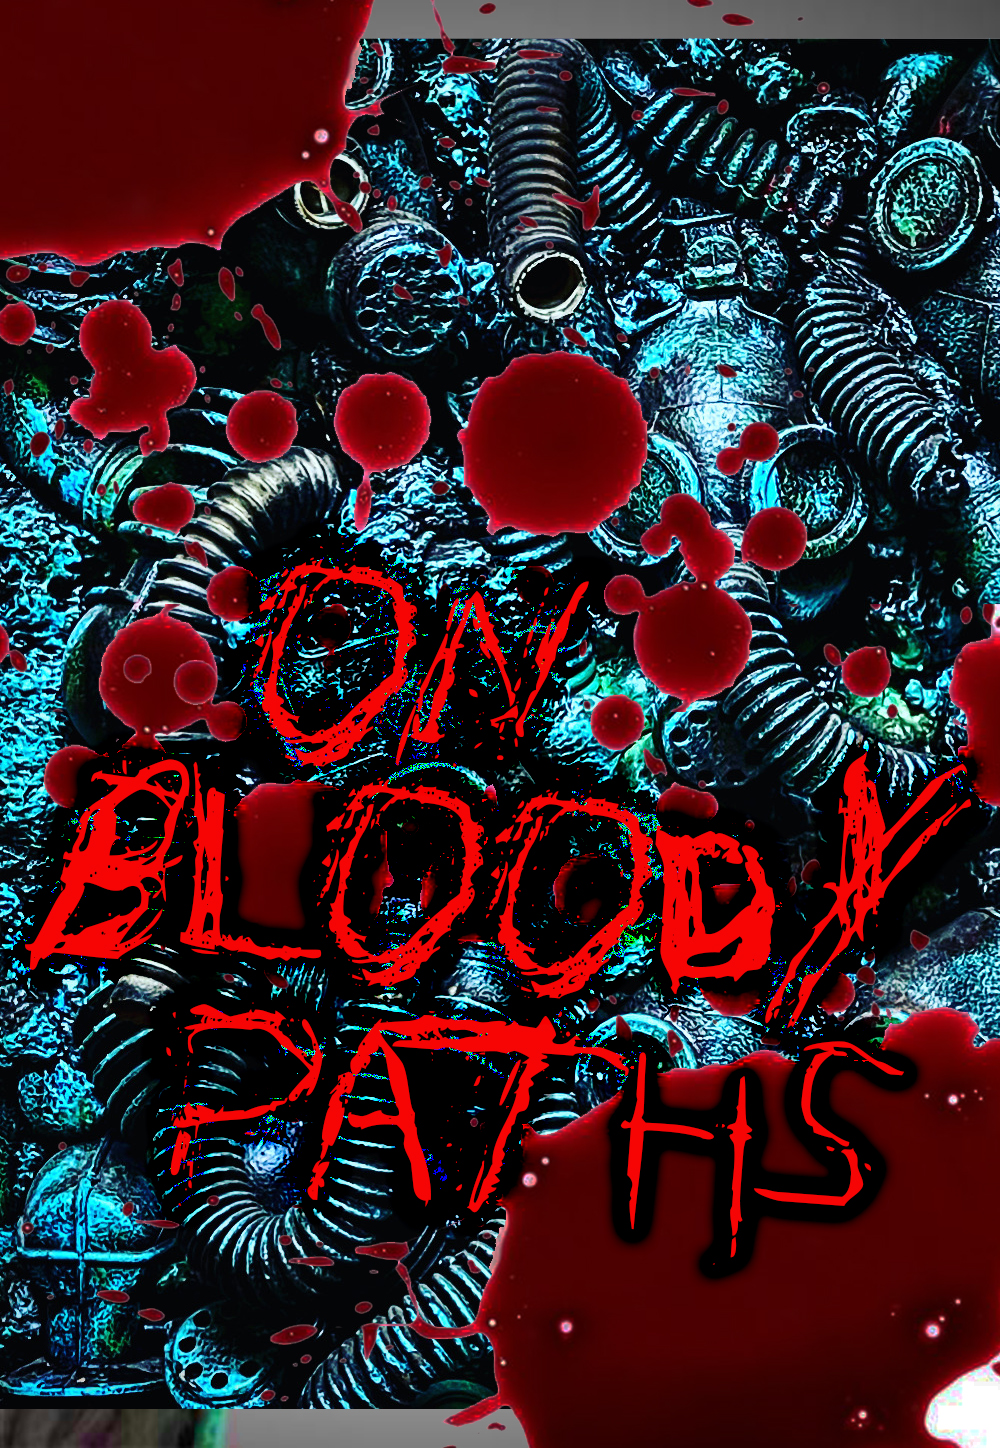 On Bloody Paths